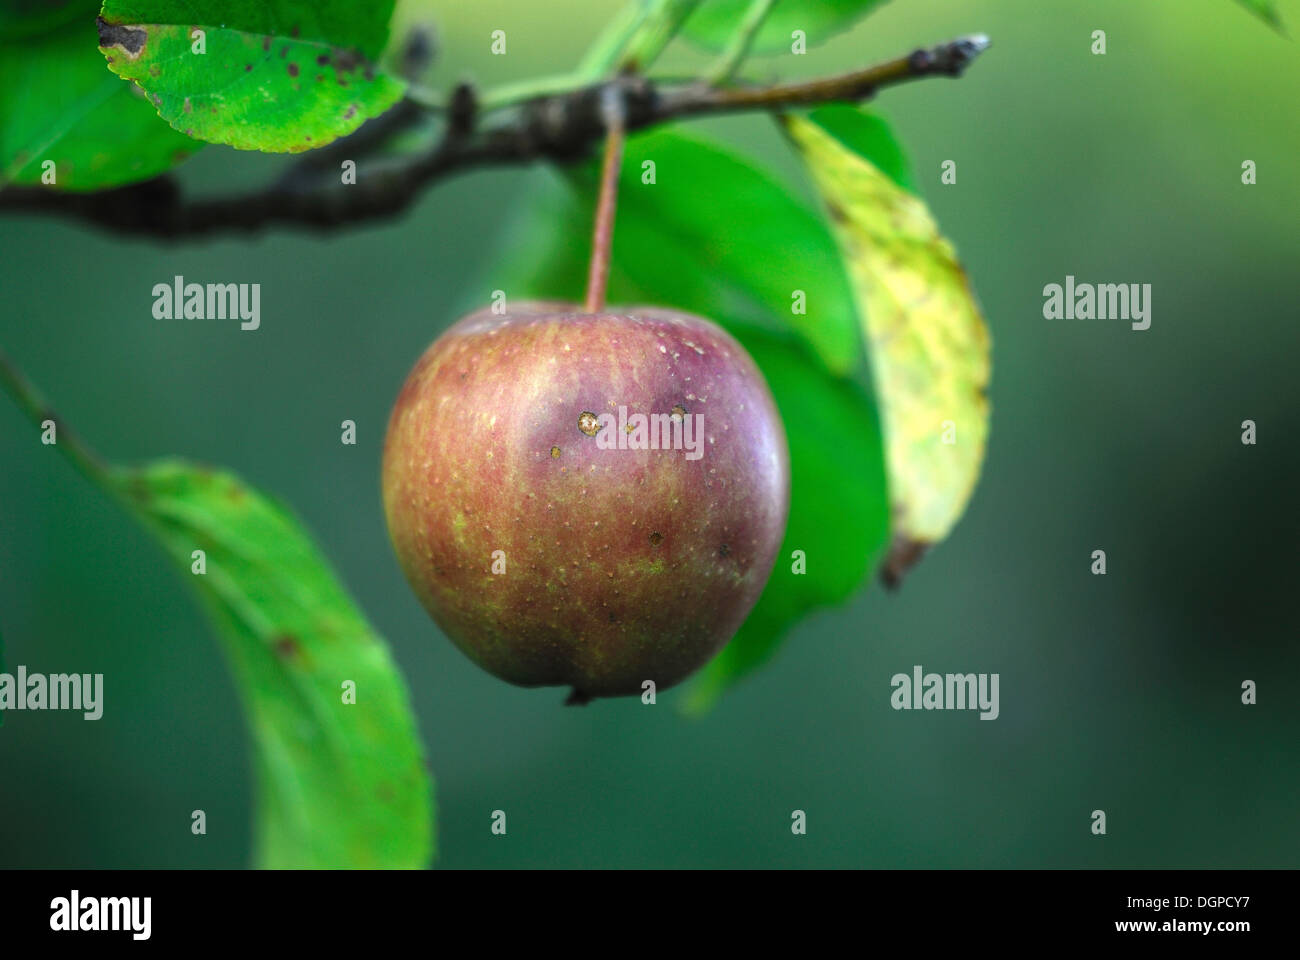 A single Golden Delicious apple growing on a tree UK Stock Photo